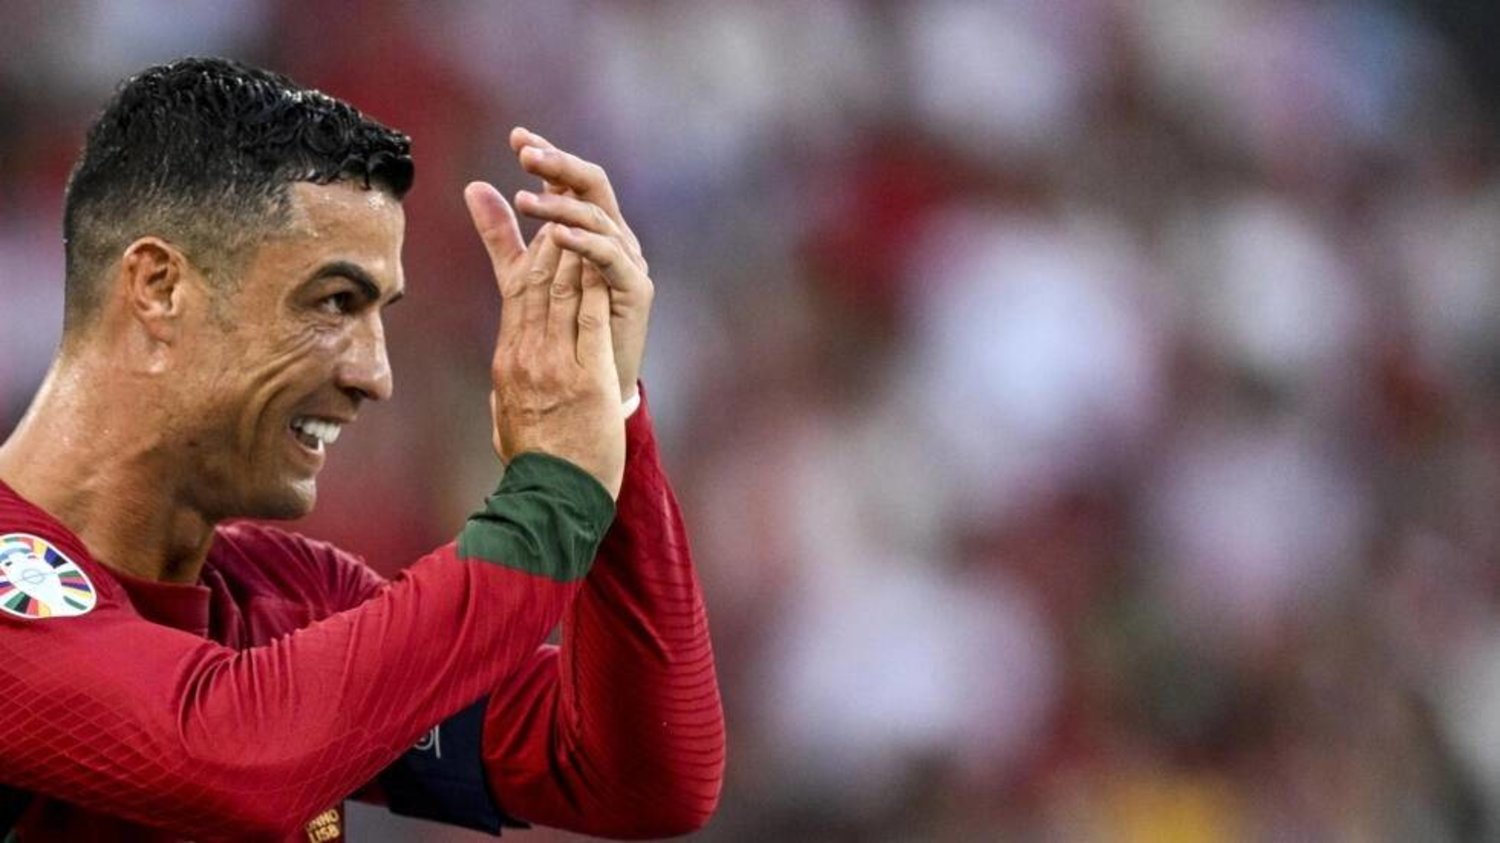 Cristiano Ronaldo: Resilience in the Face of Adversity